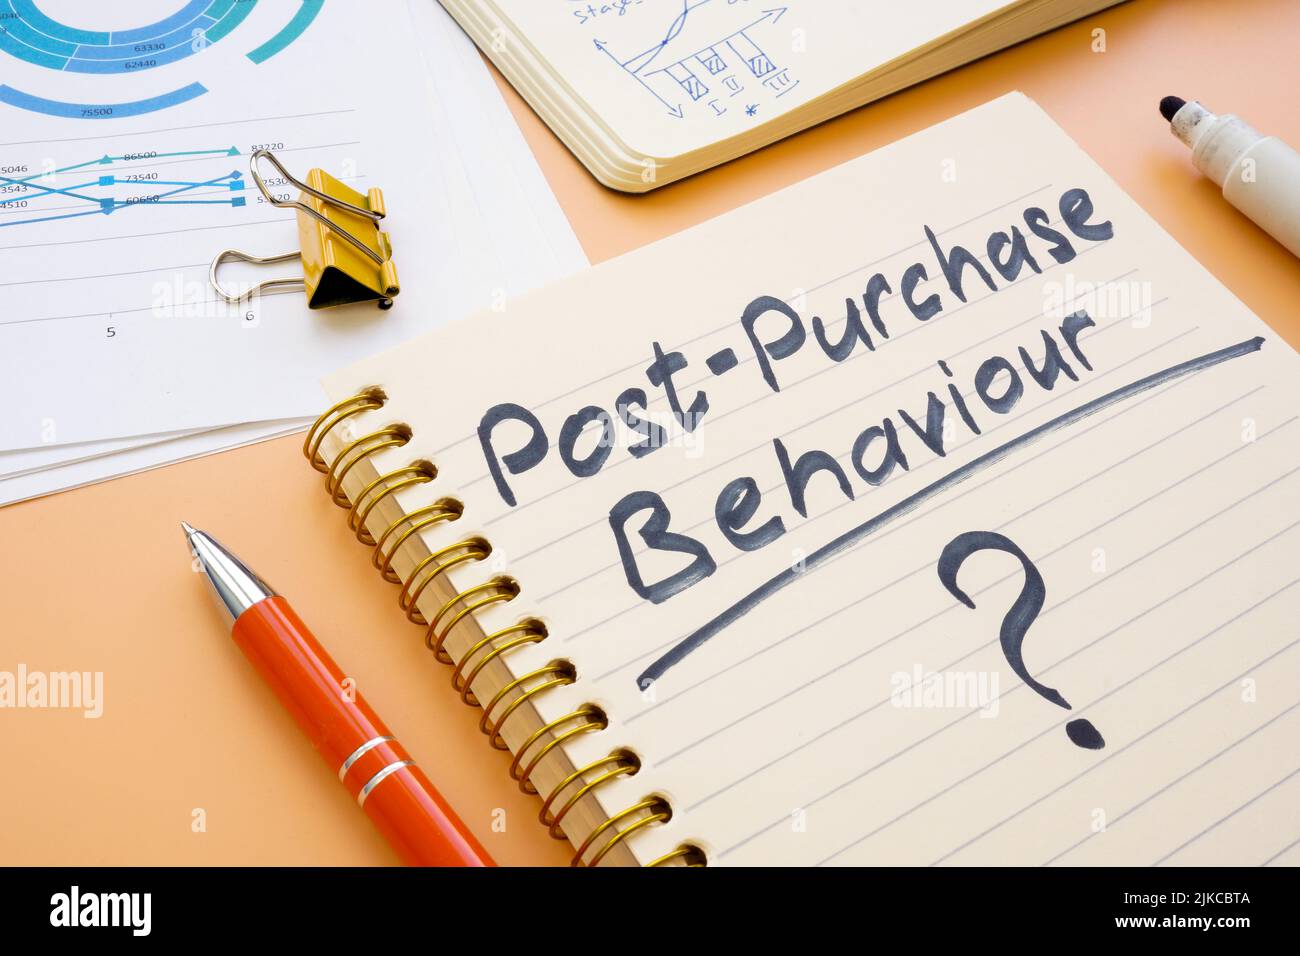 Marks about post purchase behaviour and marketing. Stock Photo